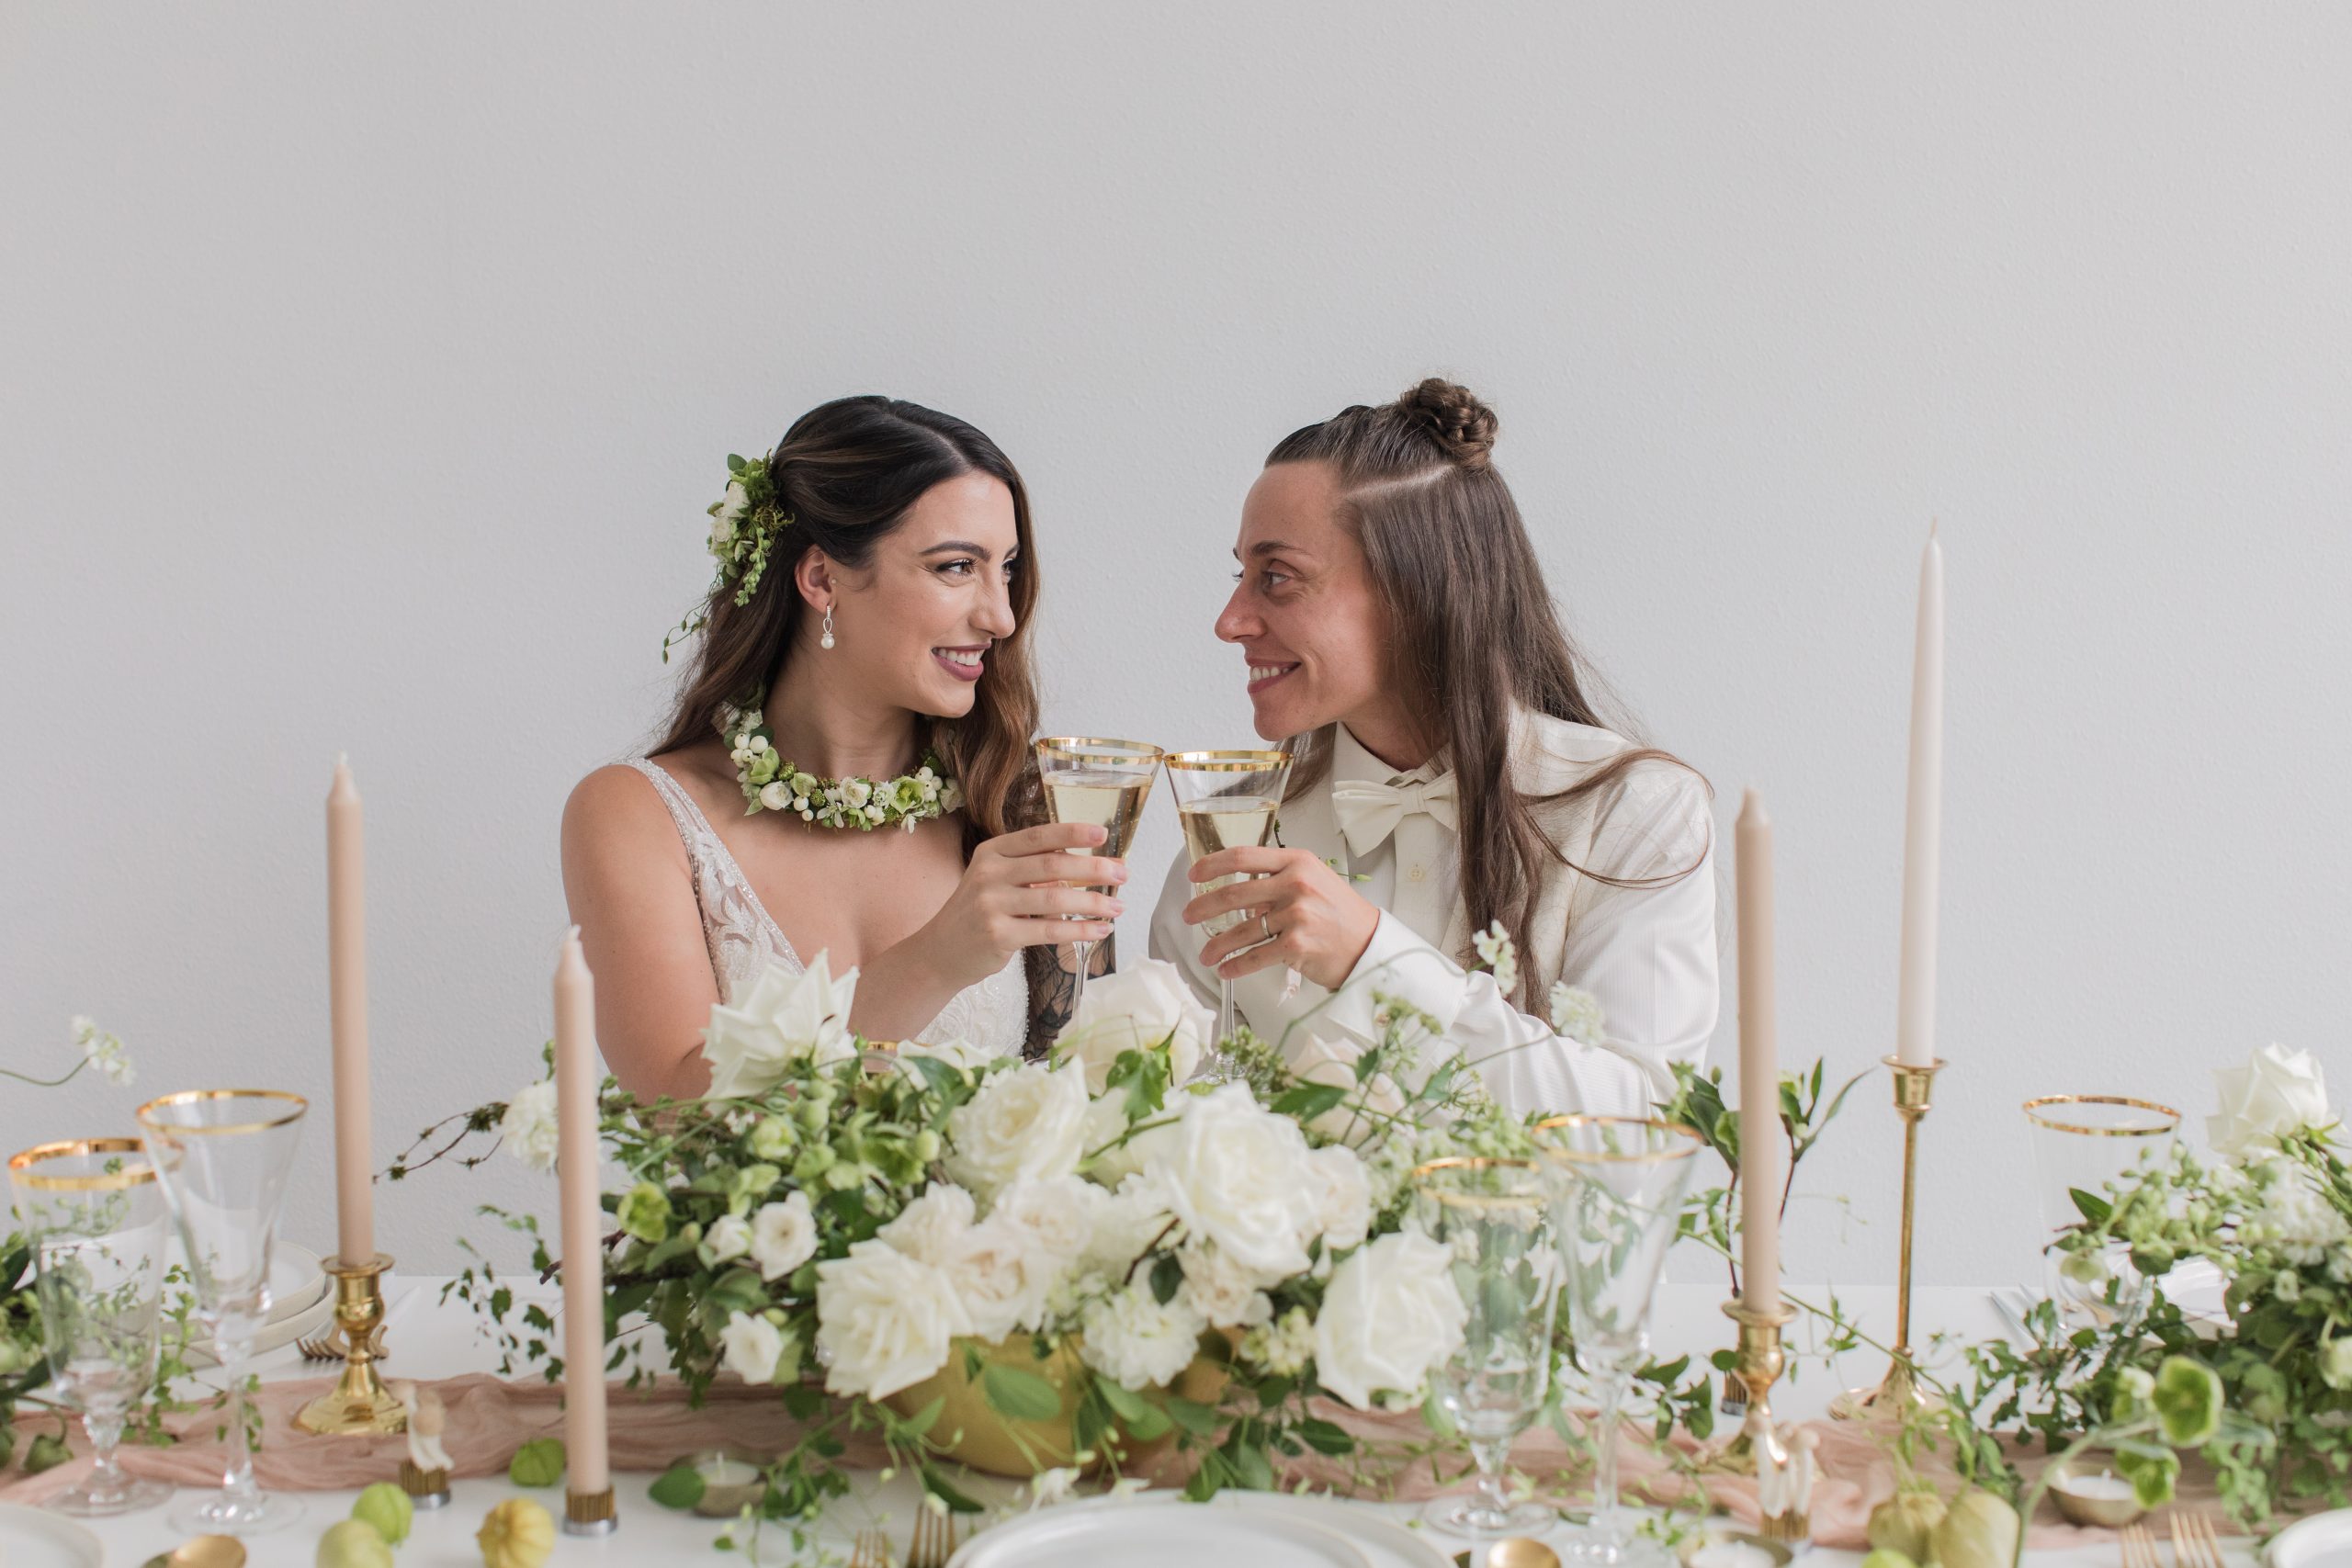 A modern white wedding with two brides toasting champagne